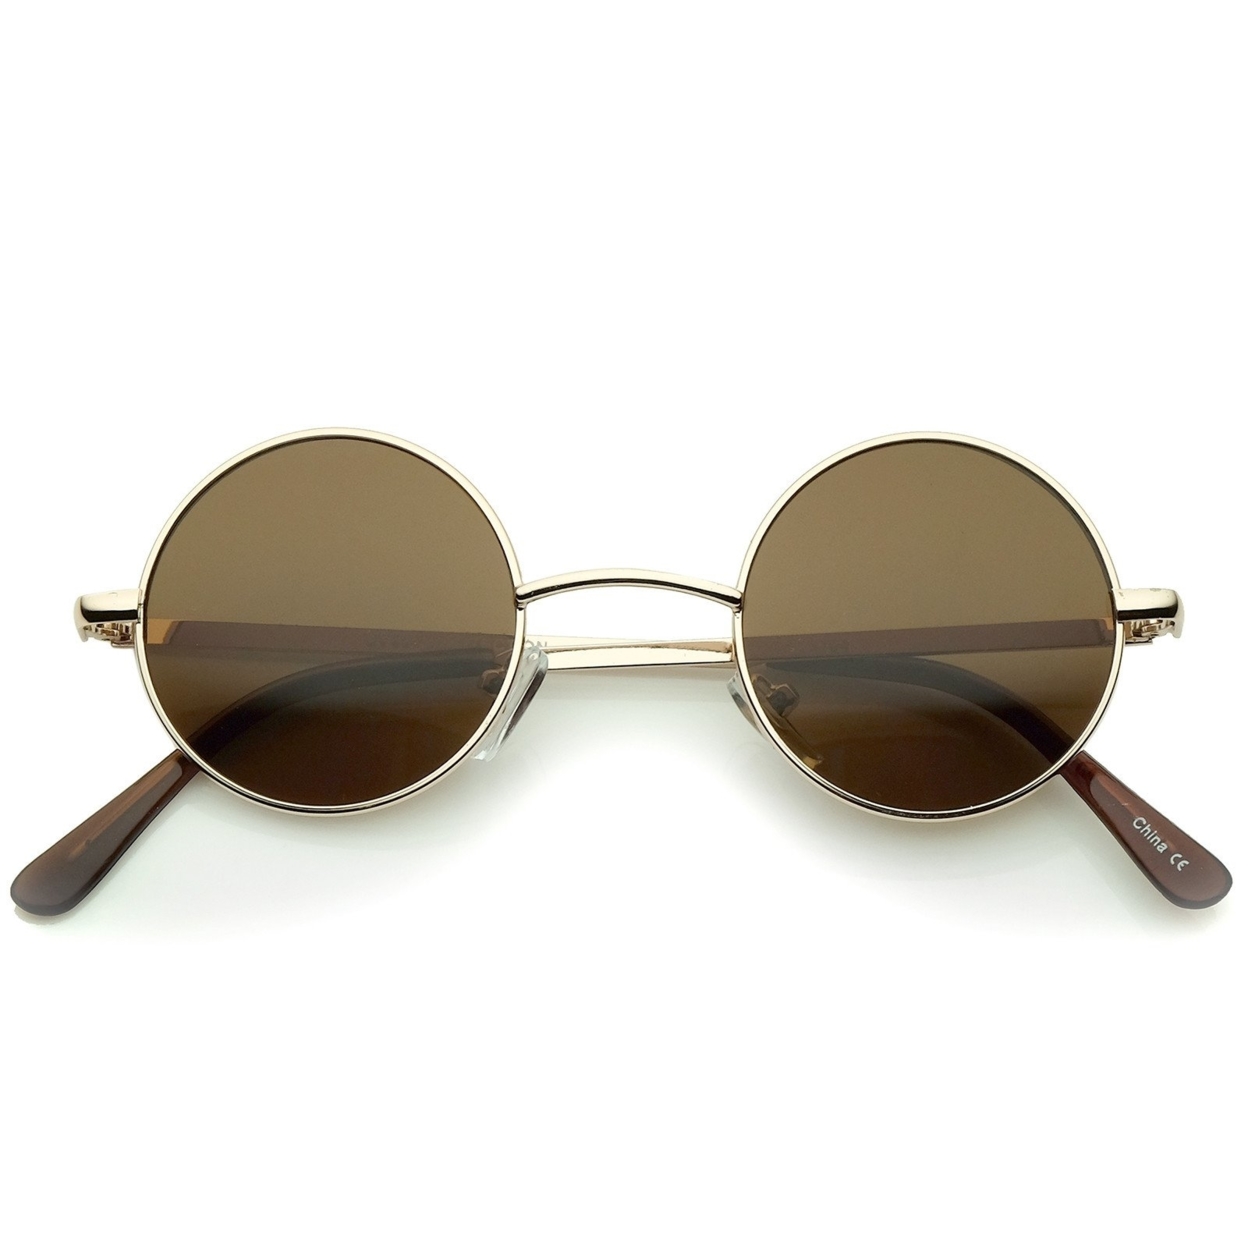 Small Retro Lennon Inspired Style Neutral-Colored Lens Round Metal Sunglasses 41mm - Gold / Brown